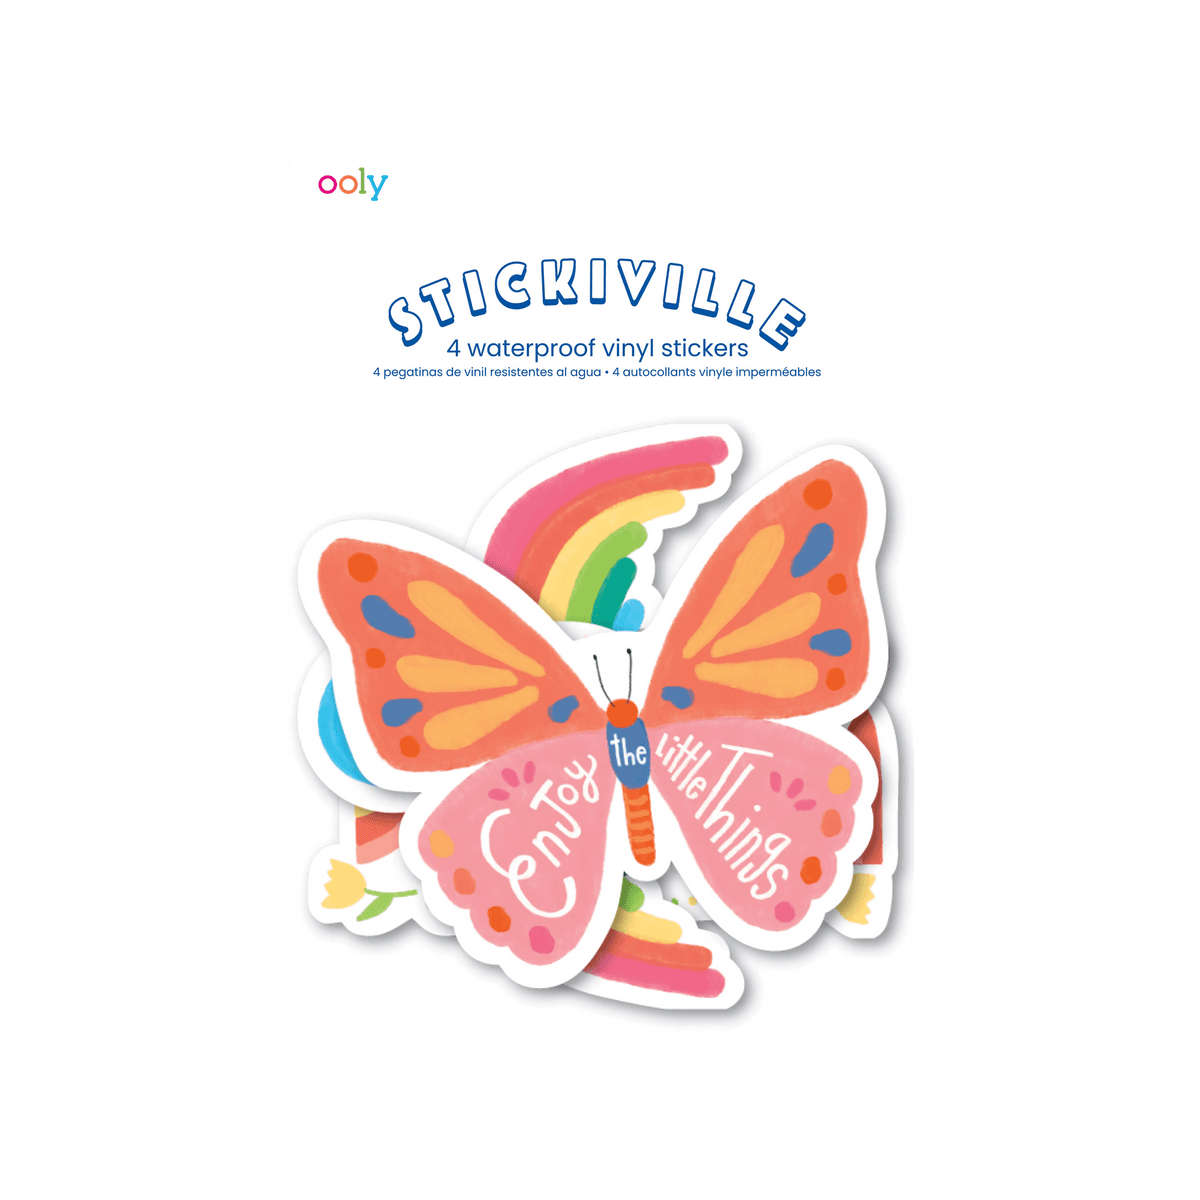 OOLY: Stickville waterproof stickers